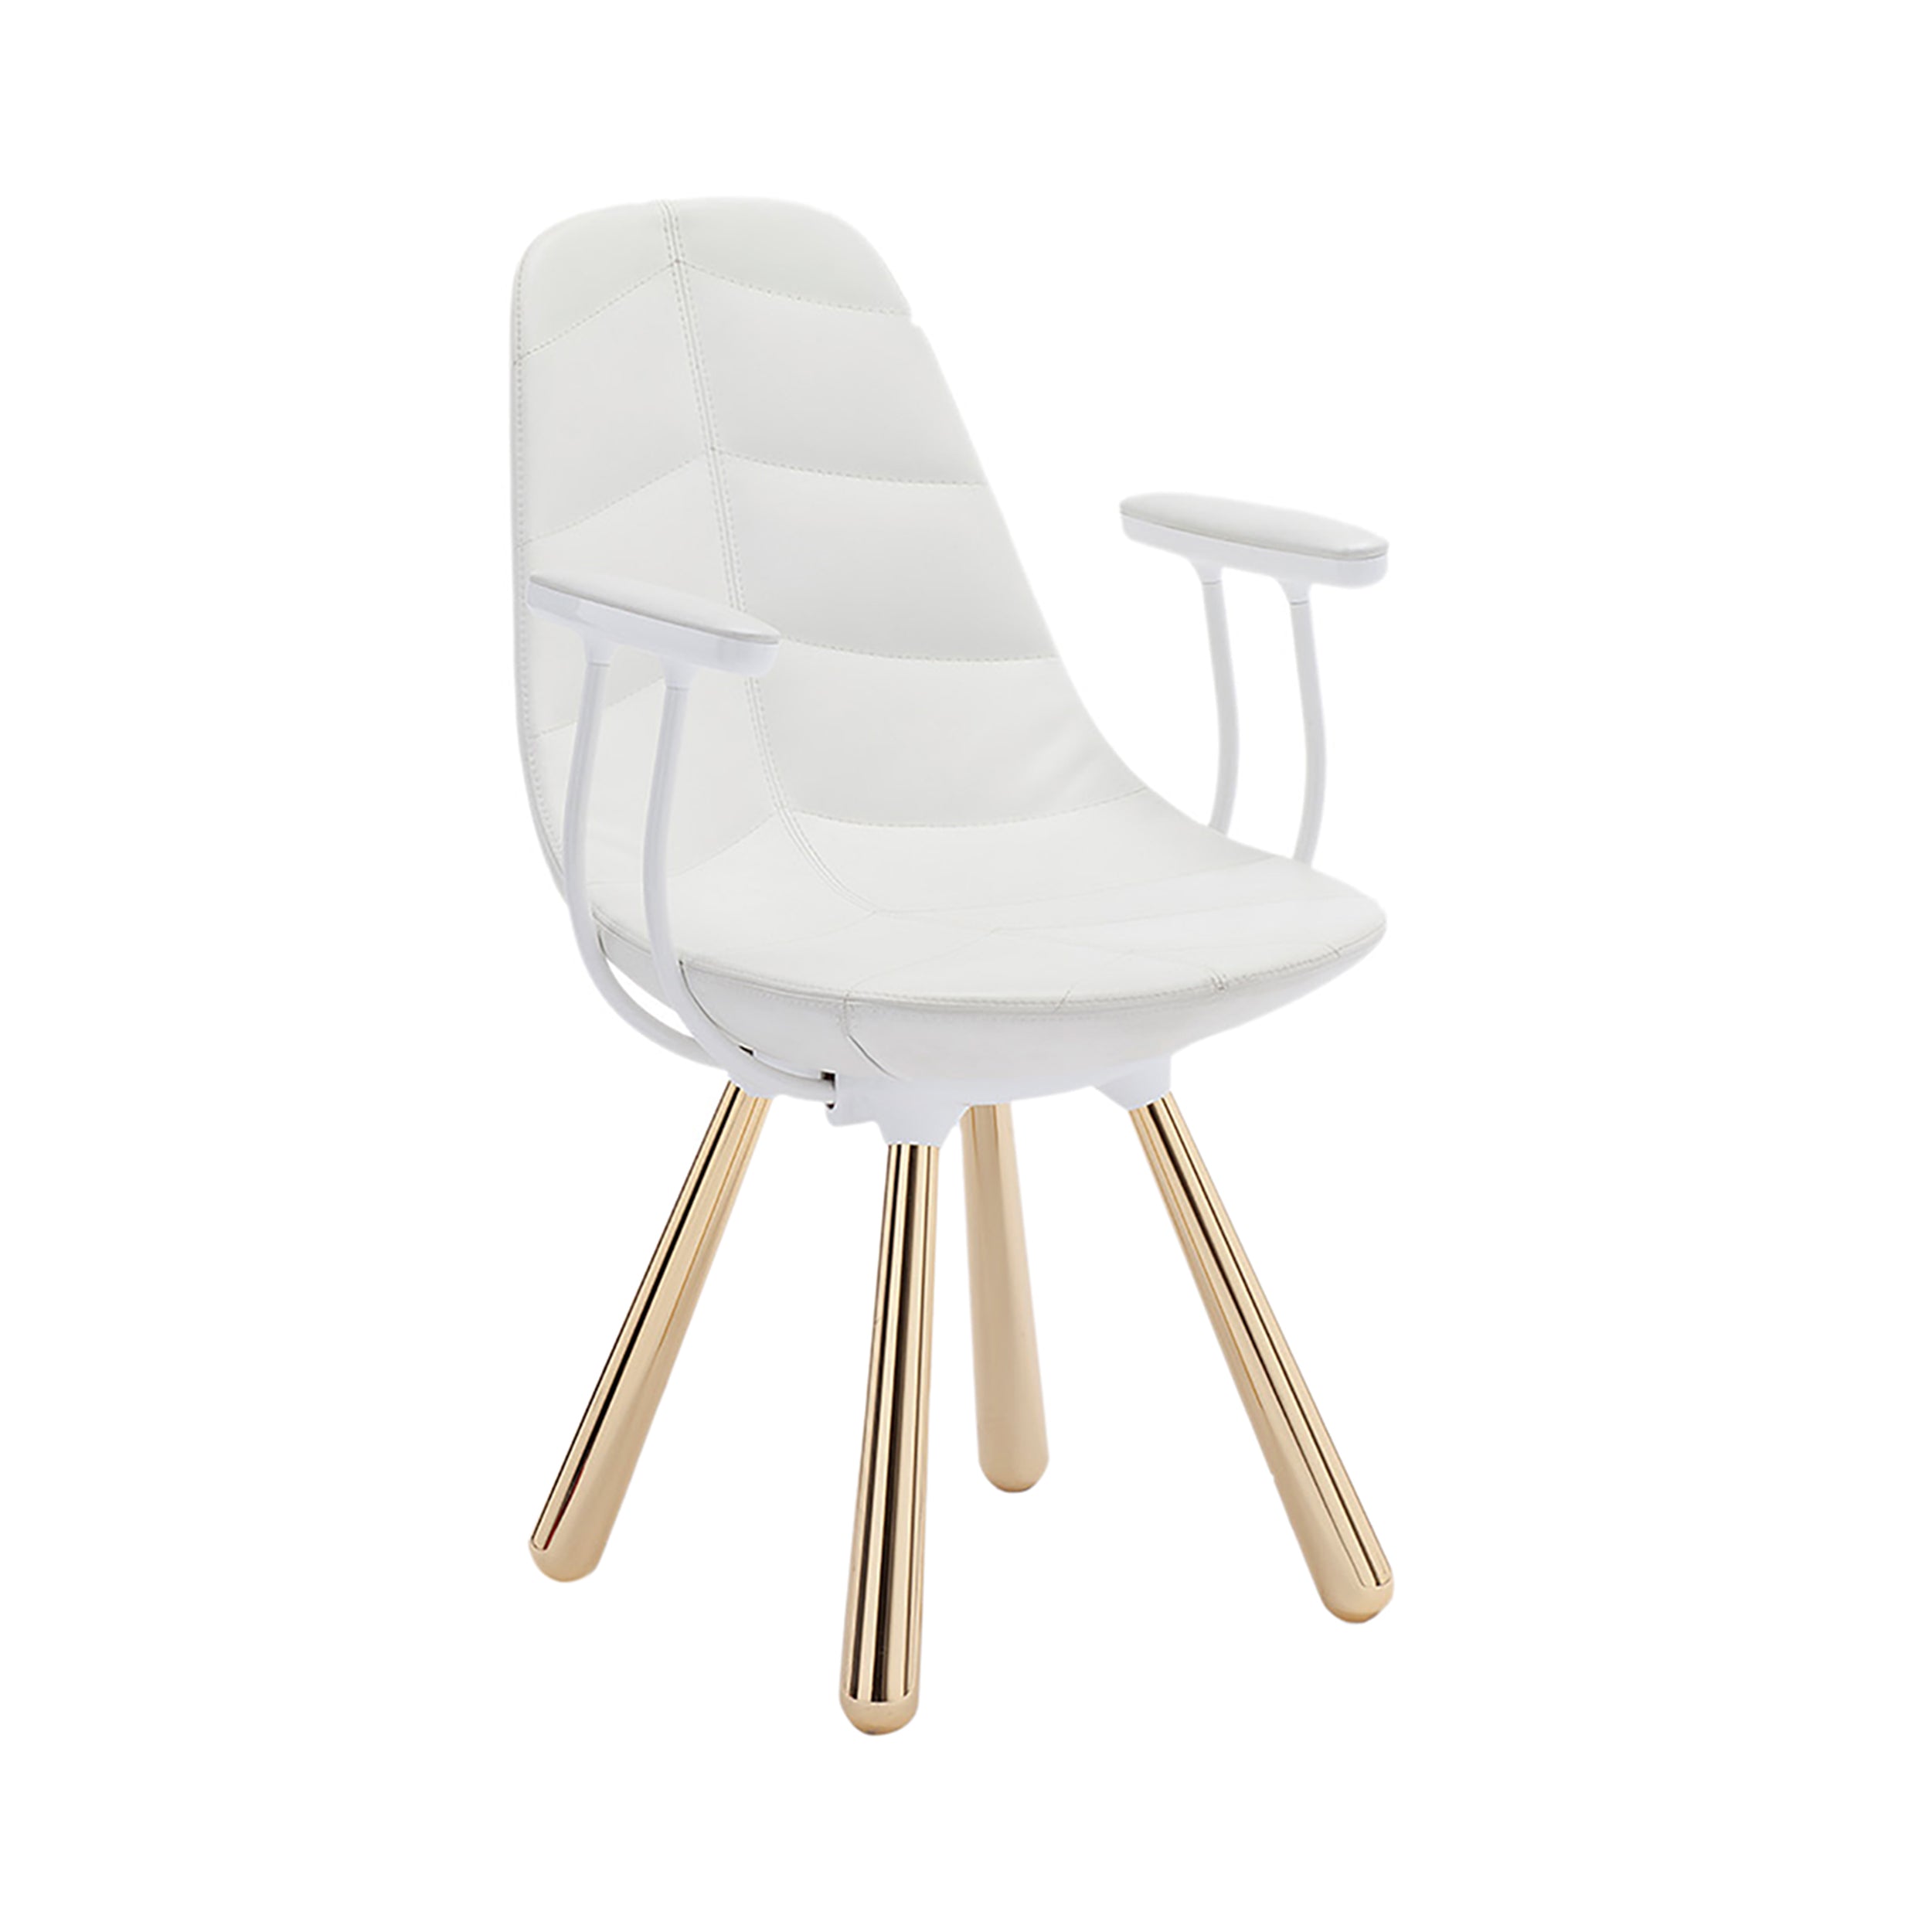 Tudor Chair: Gold + White Leather + Leaf + With Arms